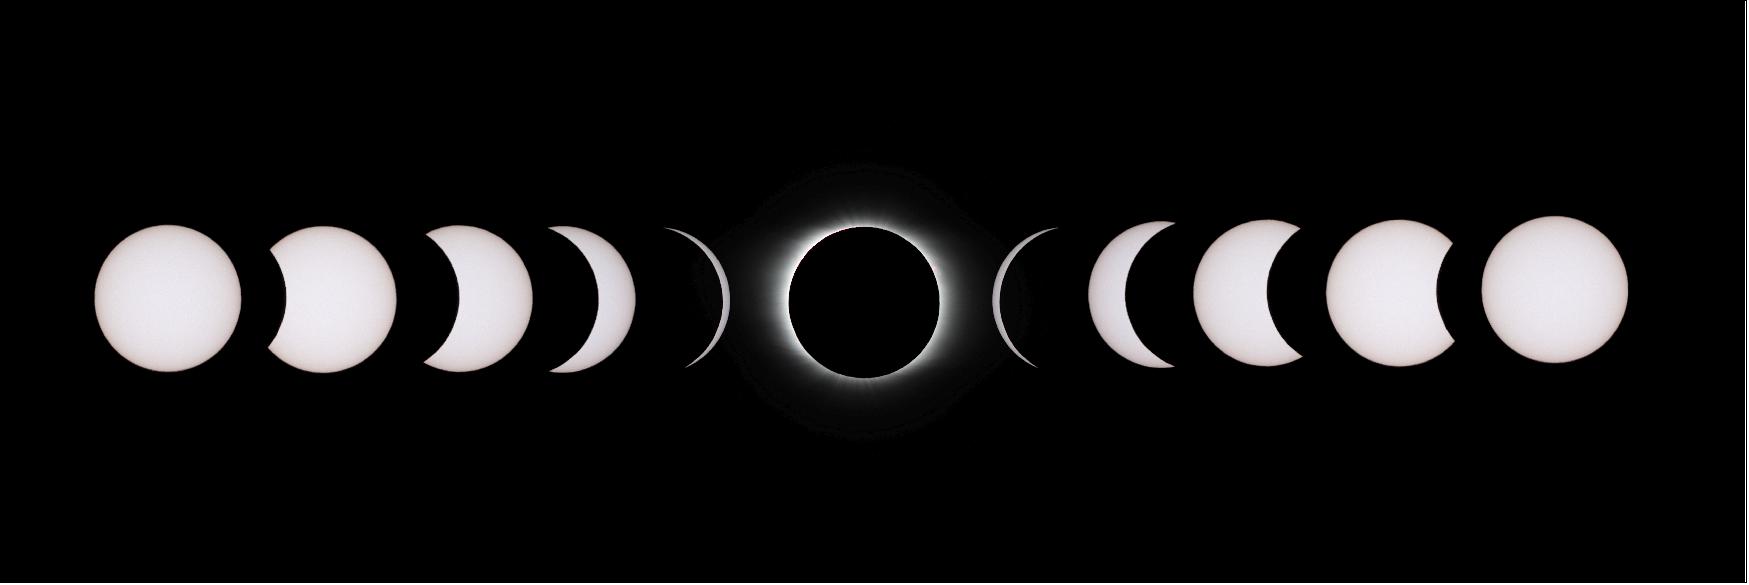 Figure 13: The images show the progression of the eclipse as the Moon moves in front of the Sun from Earth's perspective and away again. The moment where the Moon is directly in front of the Sun (center image) is known as totality (image credit: ESA/CESAR/Wouter van Reeven)